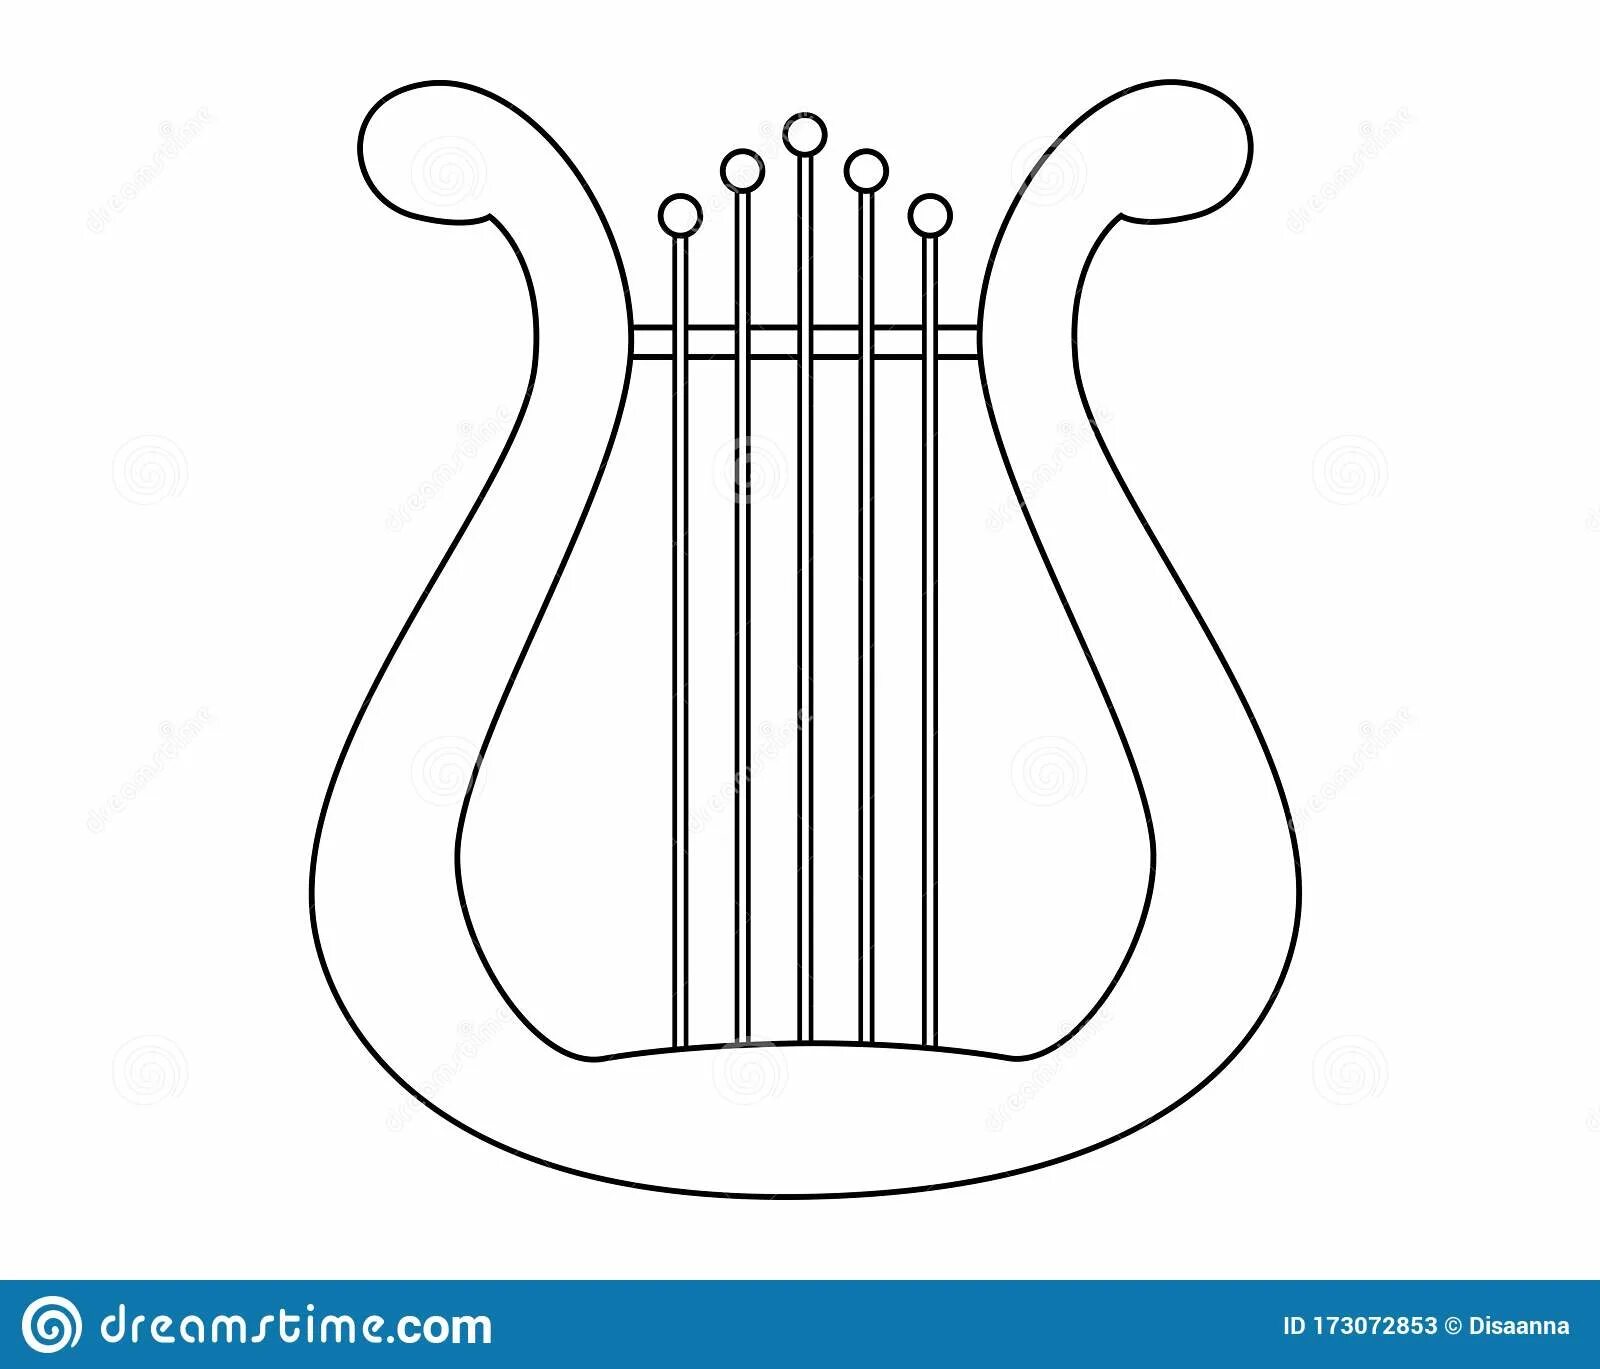 Coloring page stylish lyre